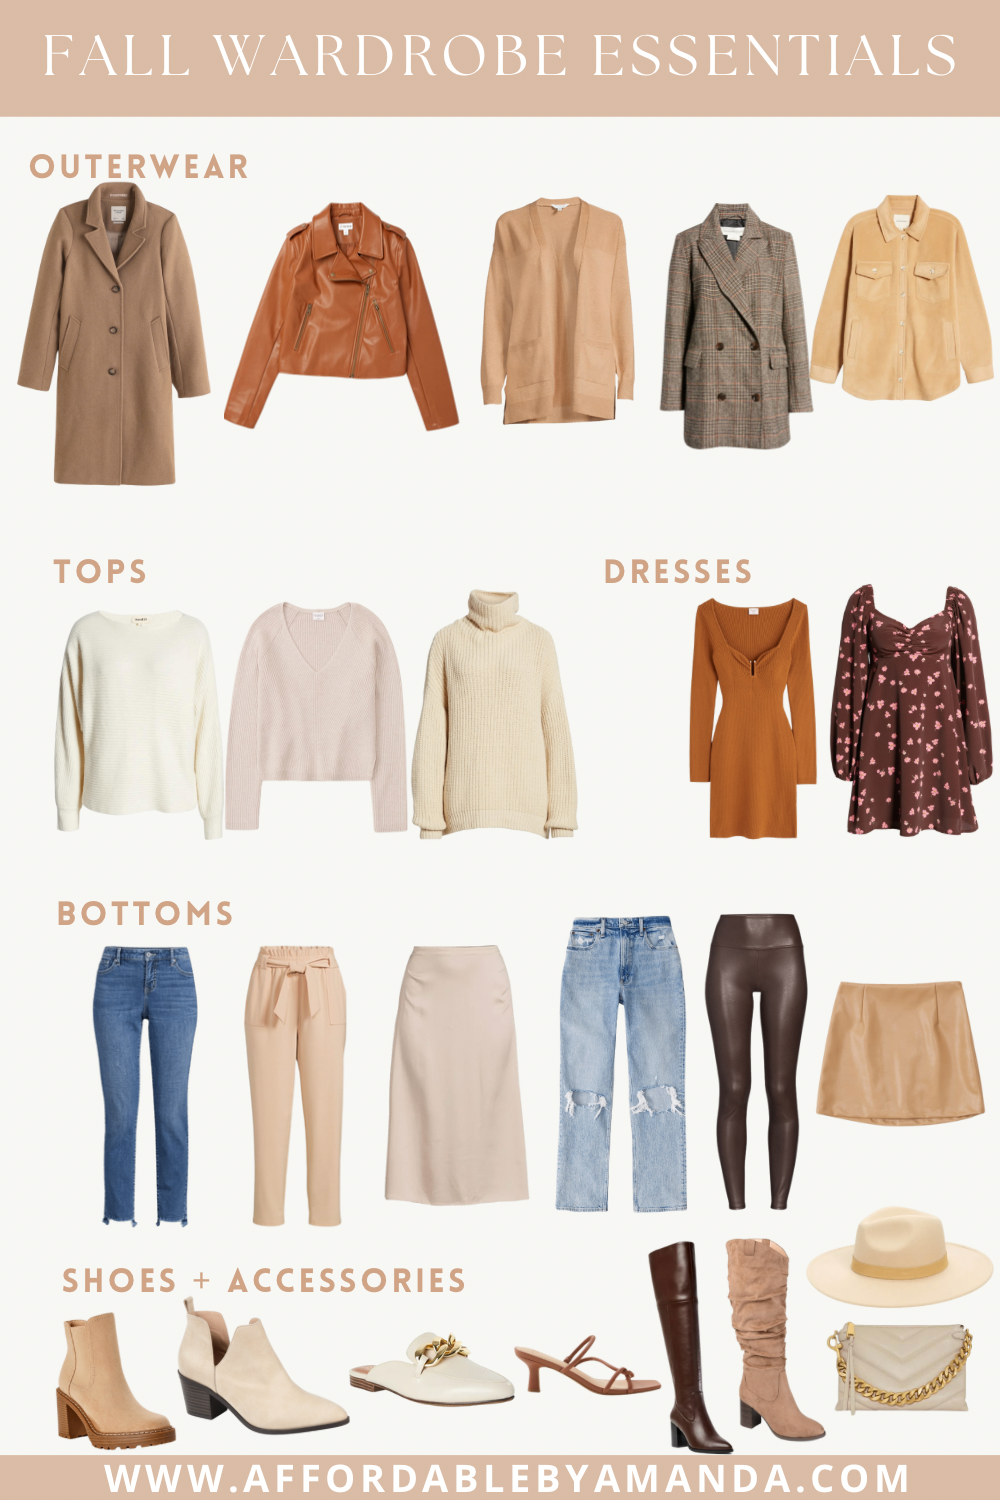 Fall Wardrobe Essentials to Update Your Style - YesMissy